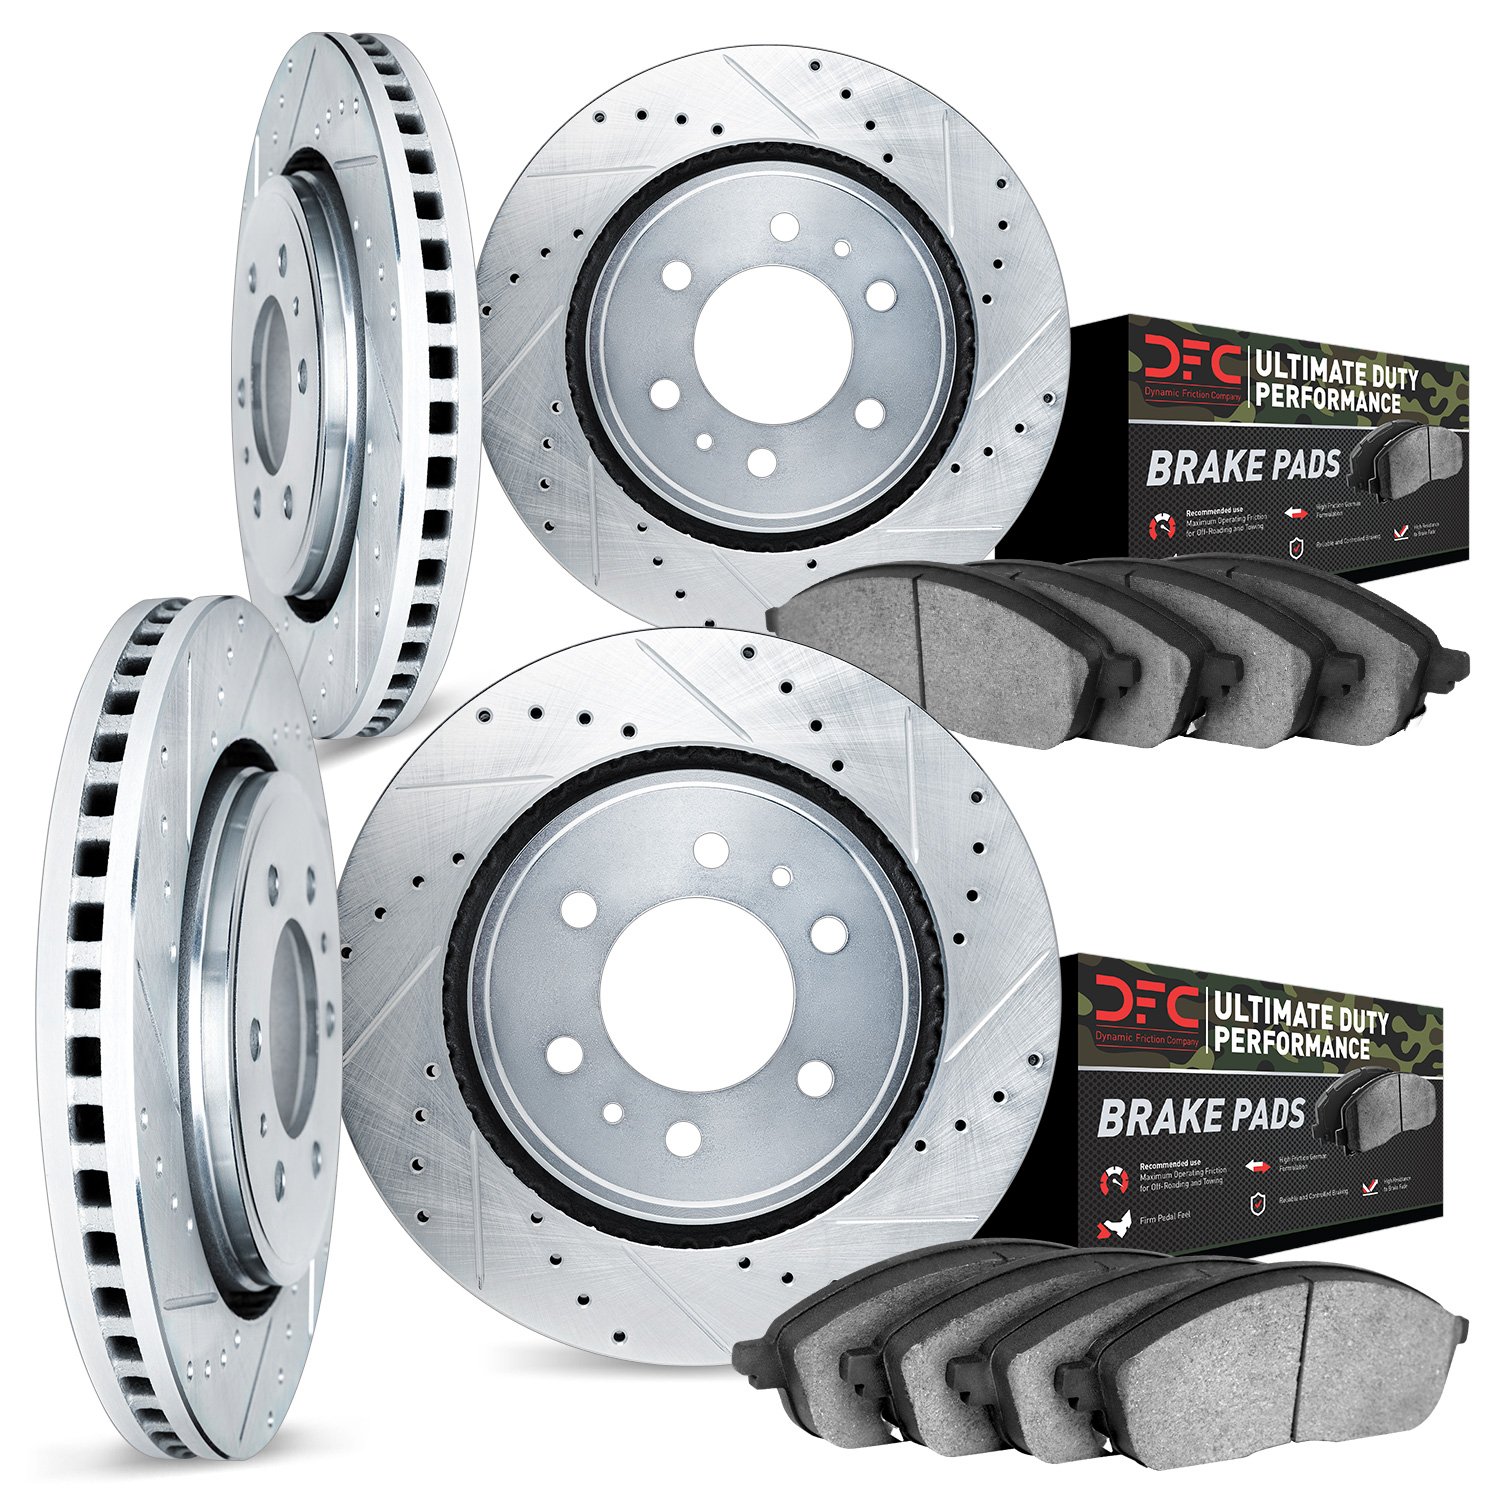 7404-76003 Drilled/Slotted Brake Rotors with Ultimate-Duty Brake Pads Kit [Silver], 2003-2009 Lexus/Toyota/Scion, Position: Fron